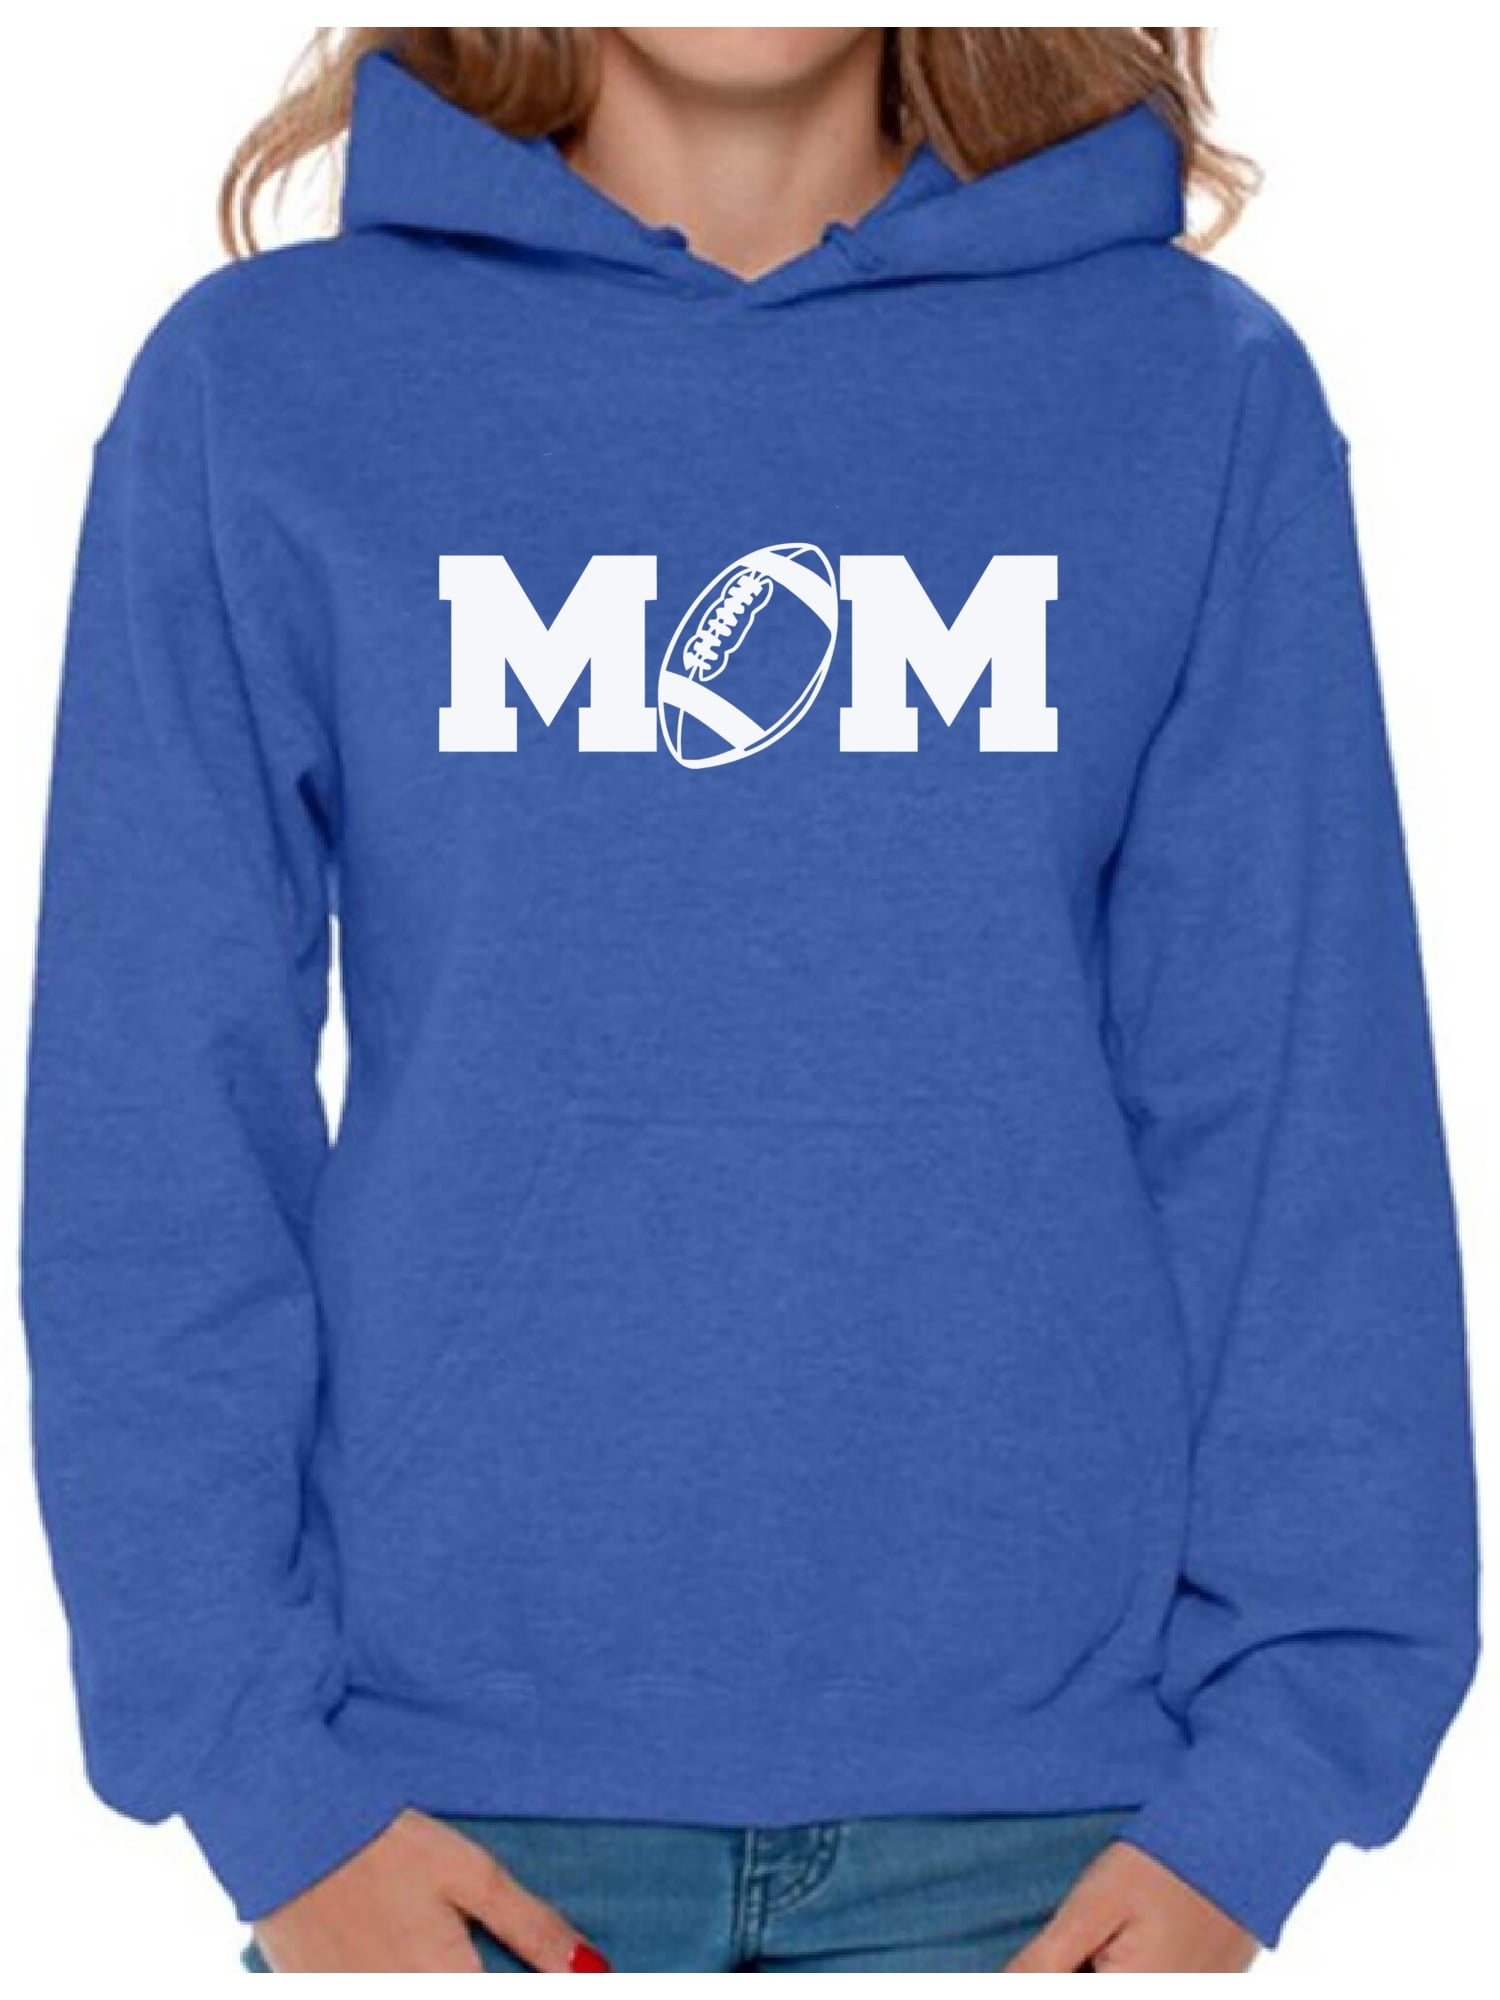 Awkward Styles Women's Football Mom Graphic Hoodie Tops White Mother's ...